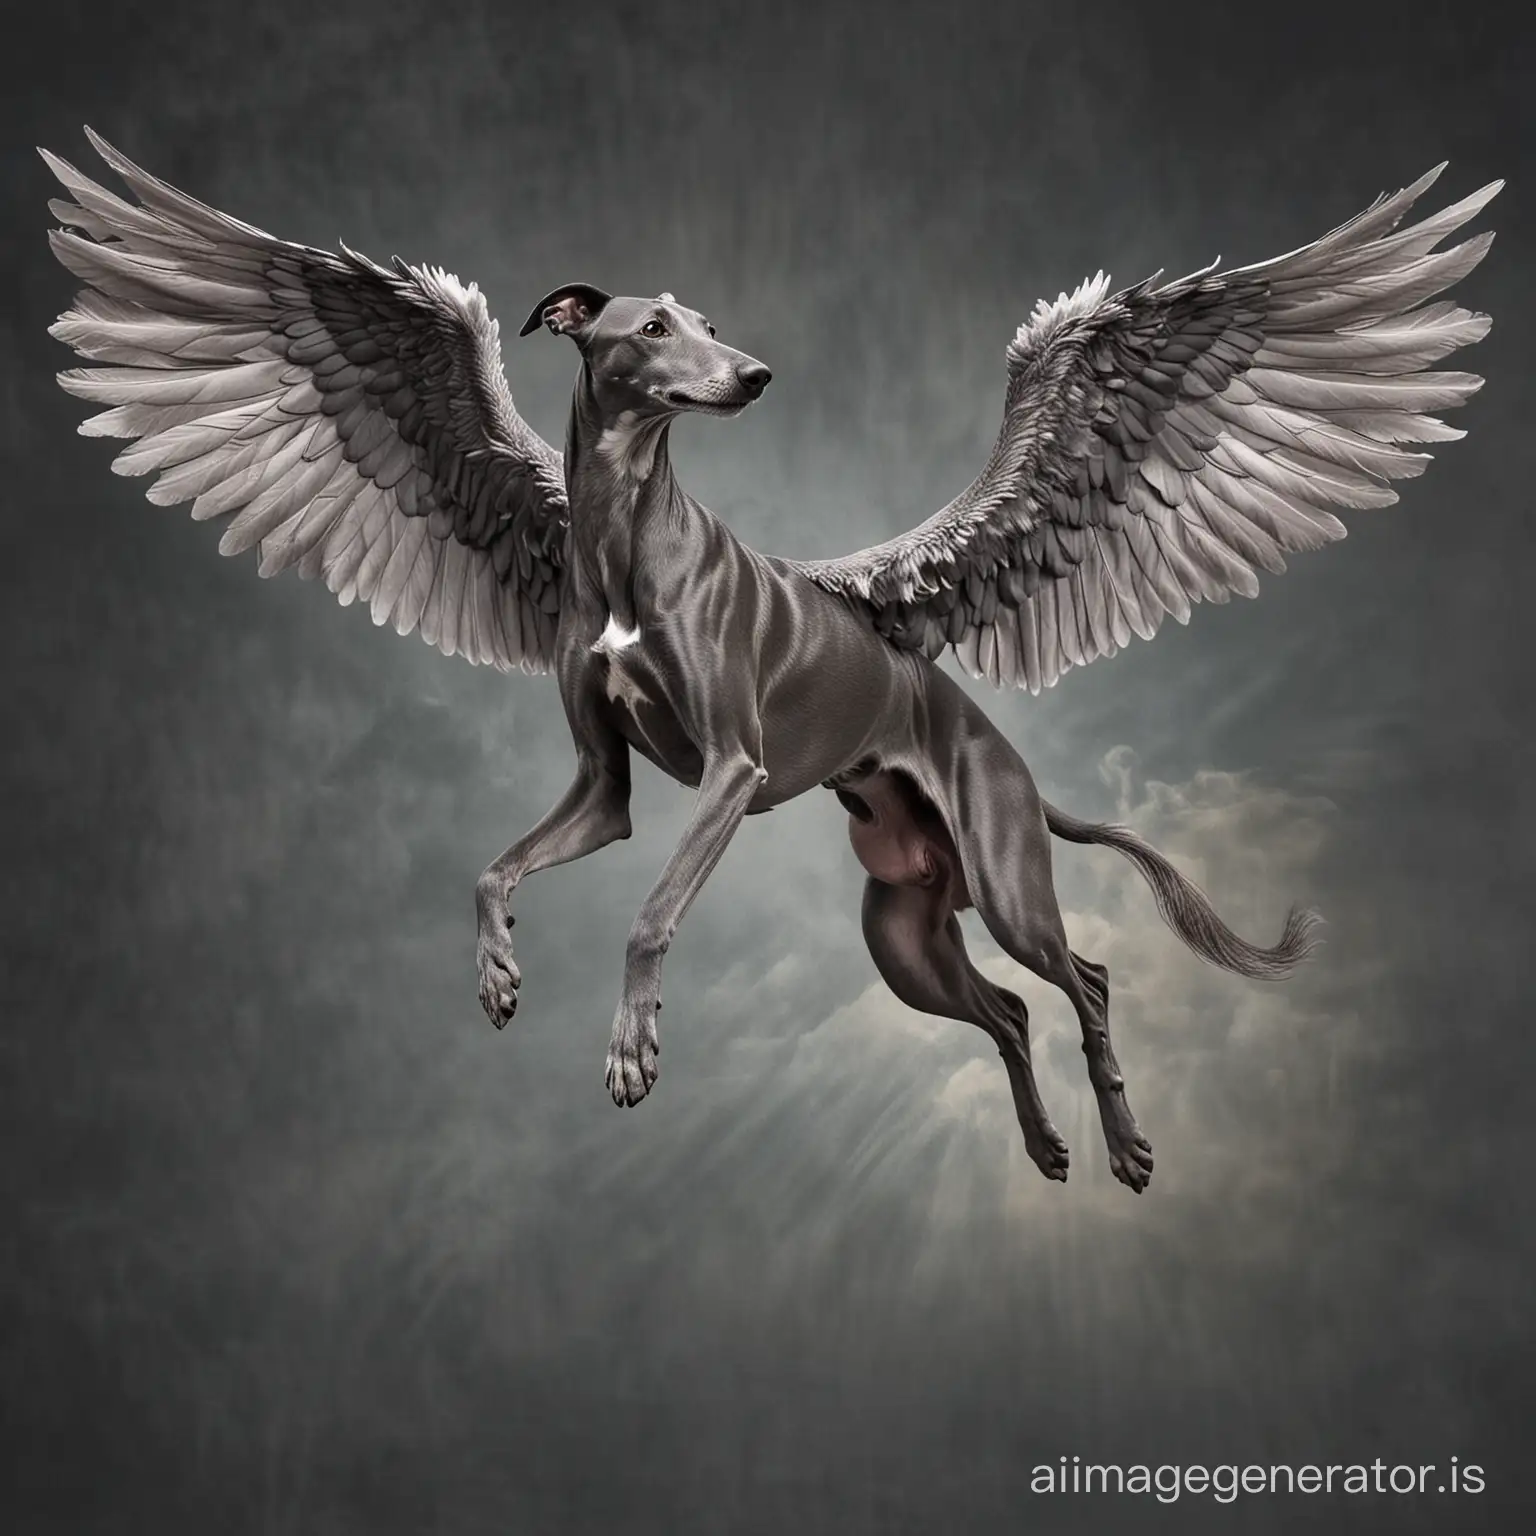 Greyhound of dark gray color with angel wings flying